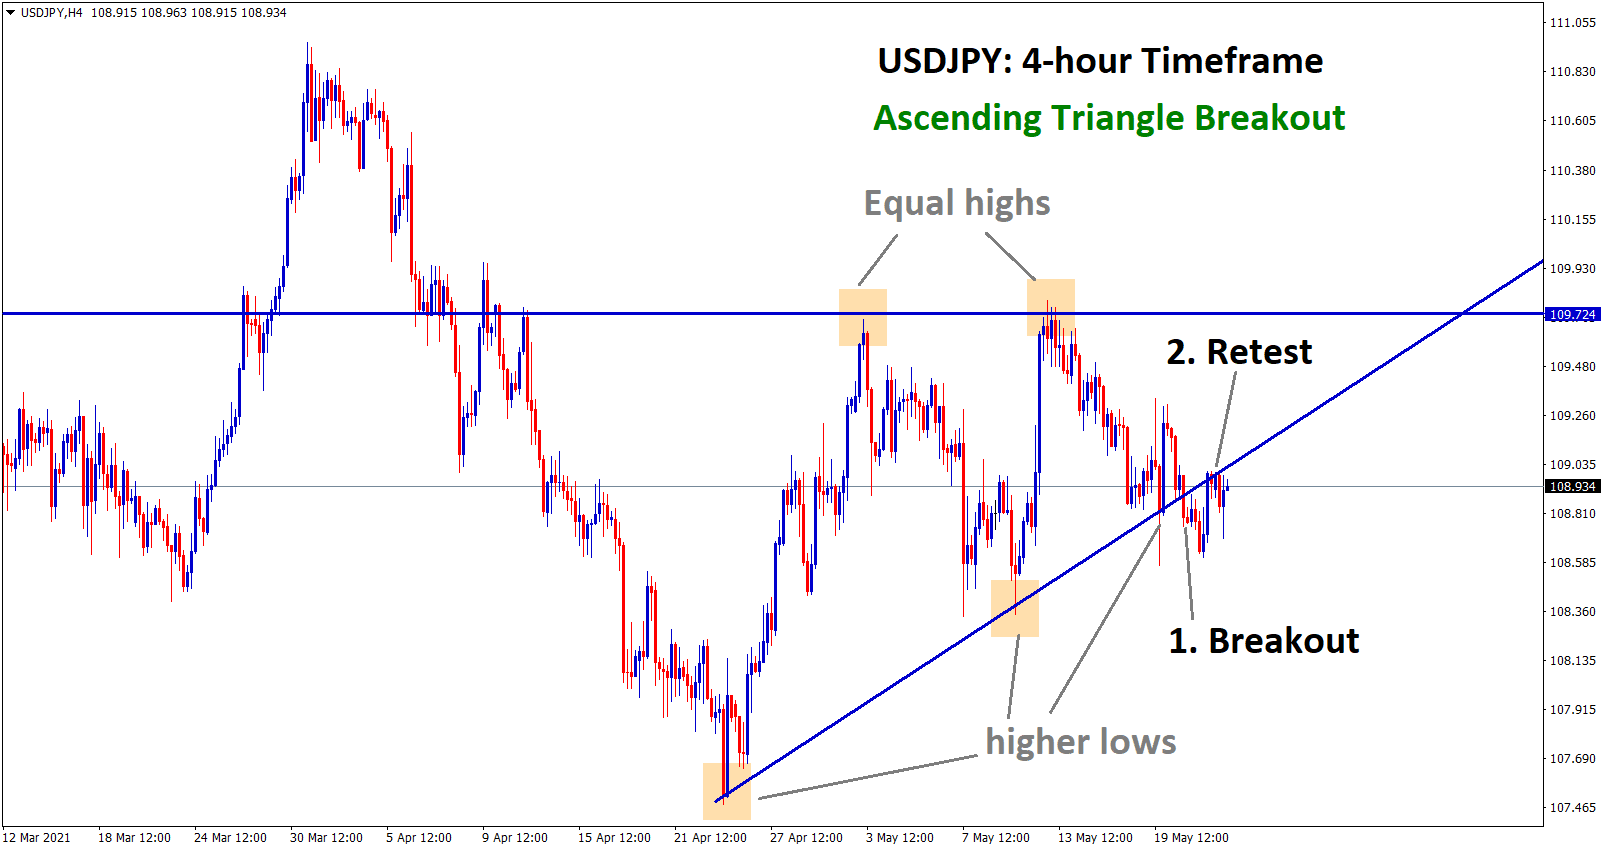 USDJPY has broken the bottom level of the Ascending Triangle and made a retest at the broken level